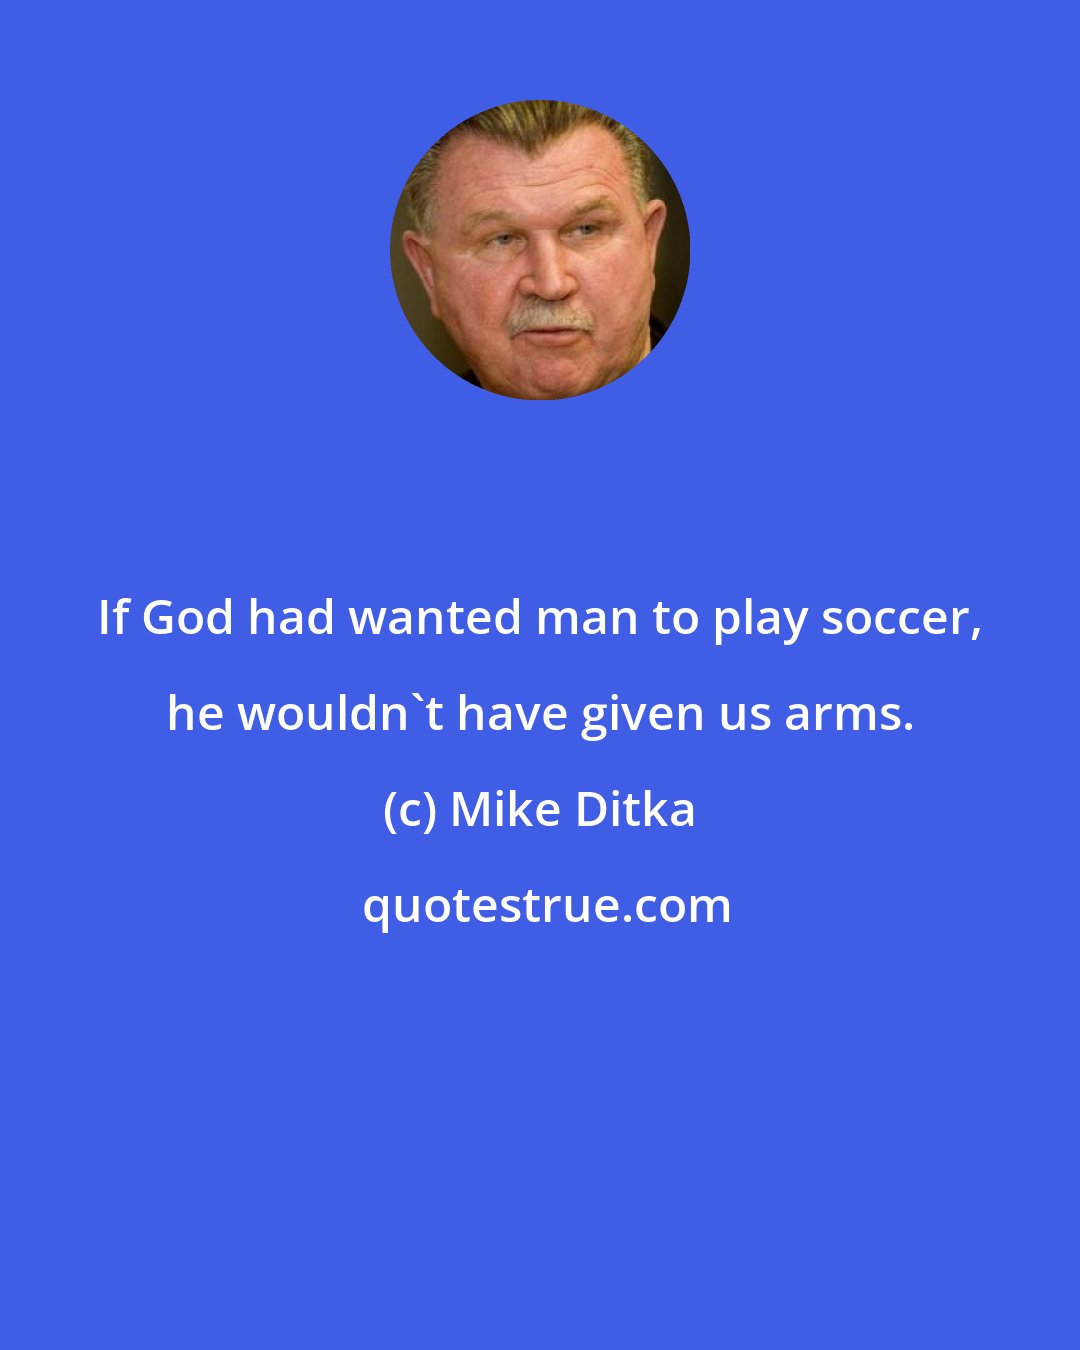 Mike Ditka: If God had wanted man to play soccer, he wouldn't have given us arms.